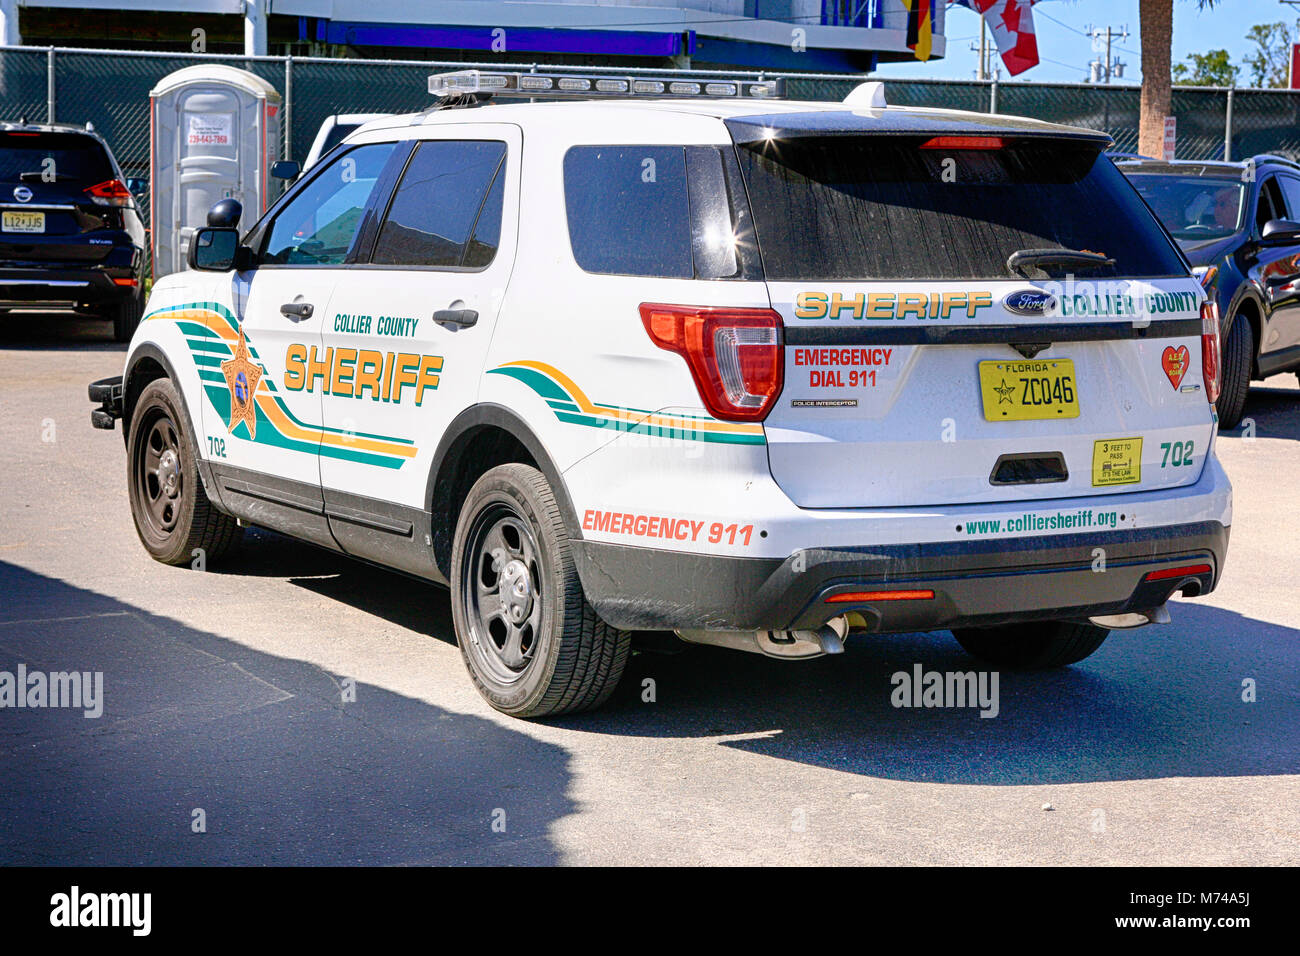 A Collier County Sheriff's vehicle at Everglades City, Florida USA Stock Photo